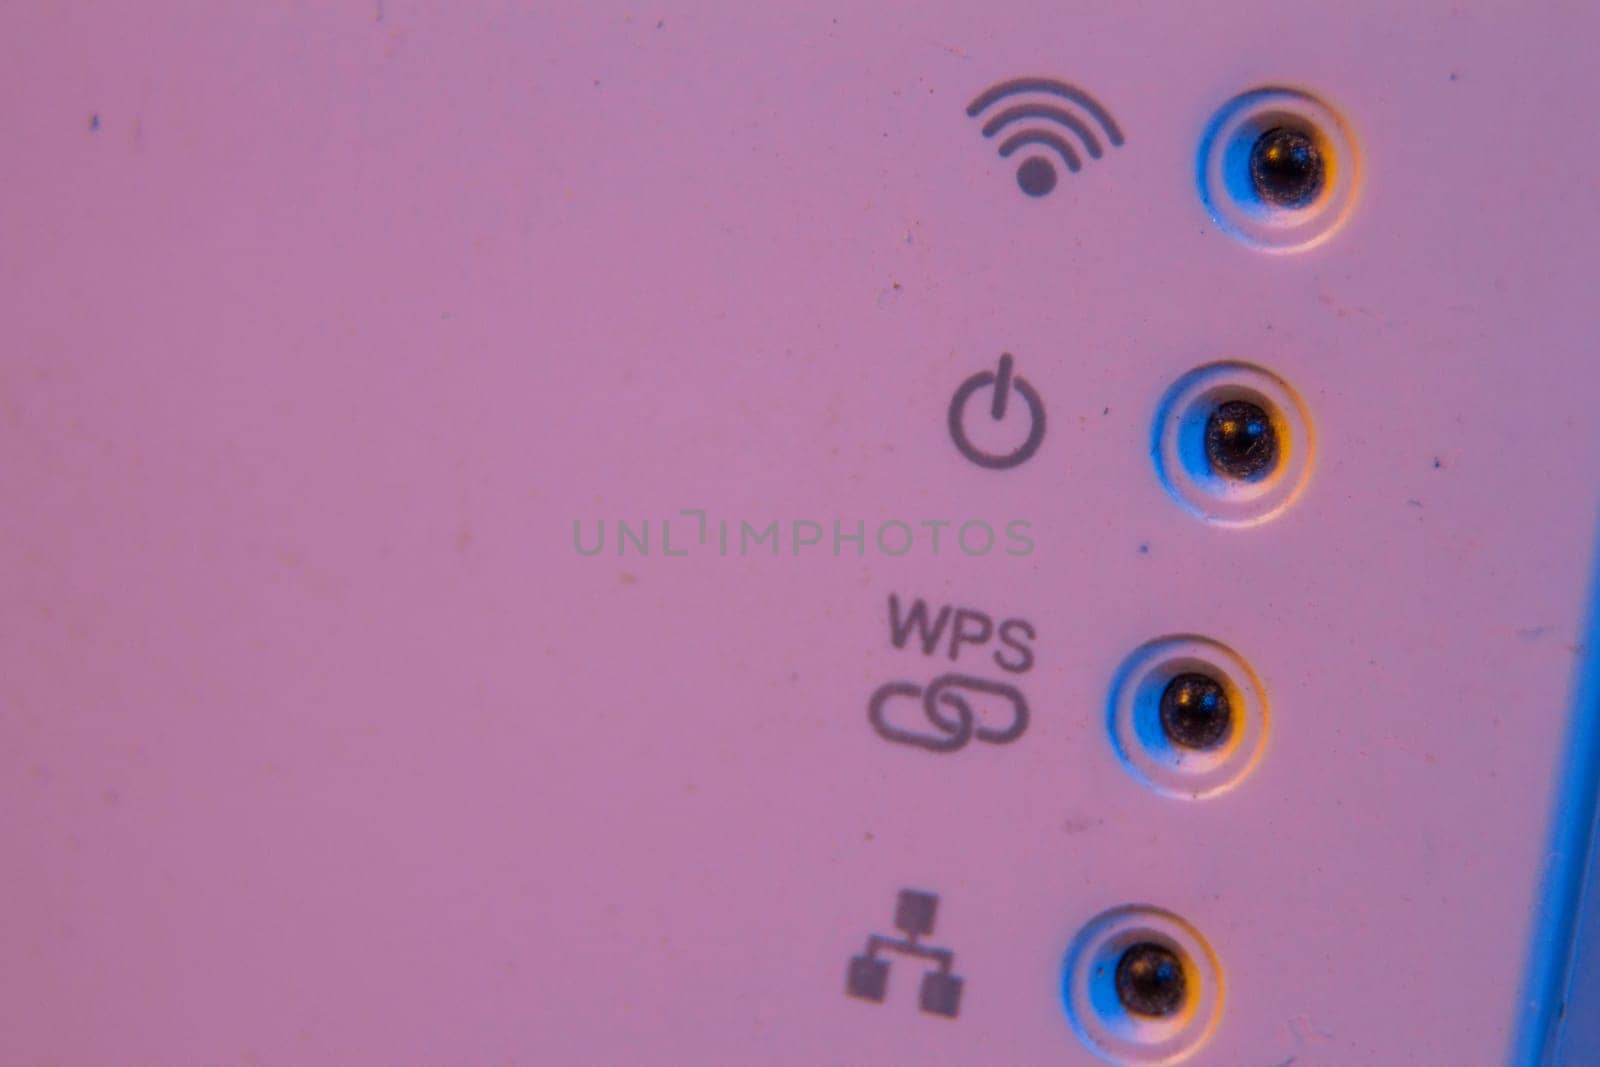 Macro closeup on WiFi repeater signal connection status led lights. The device is in electrical socket on the wall. It help to extend wireless network in home or office.